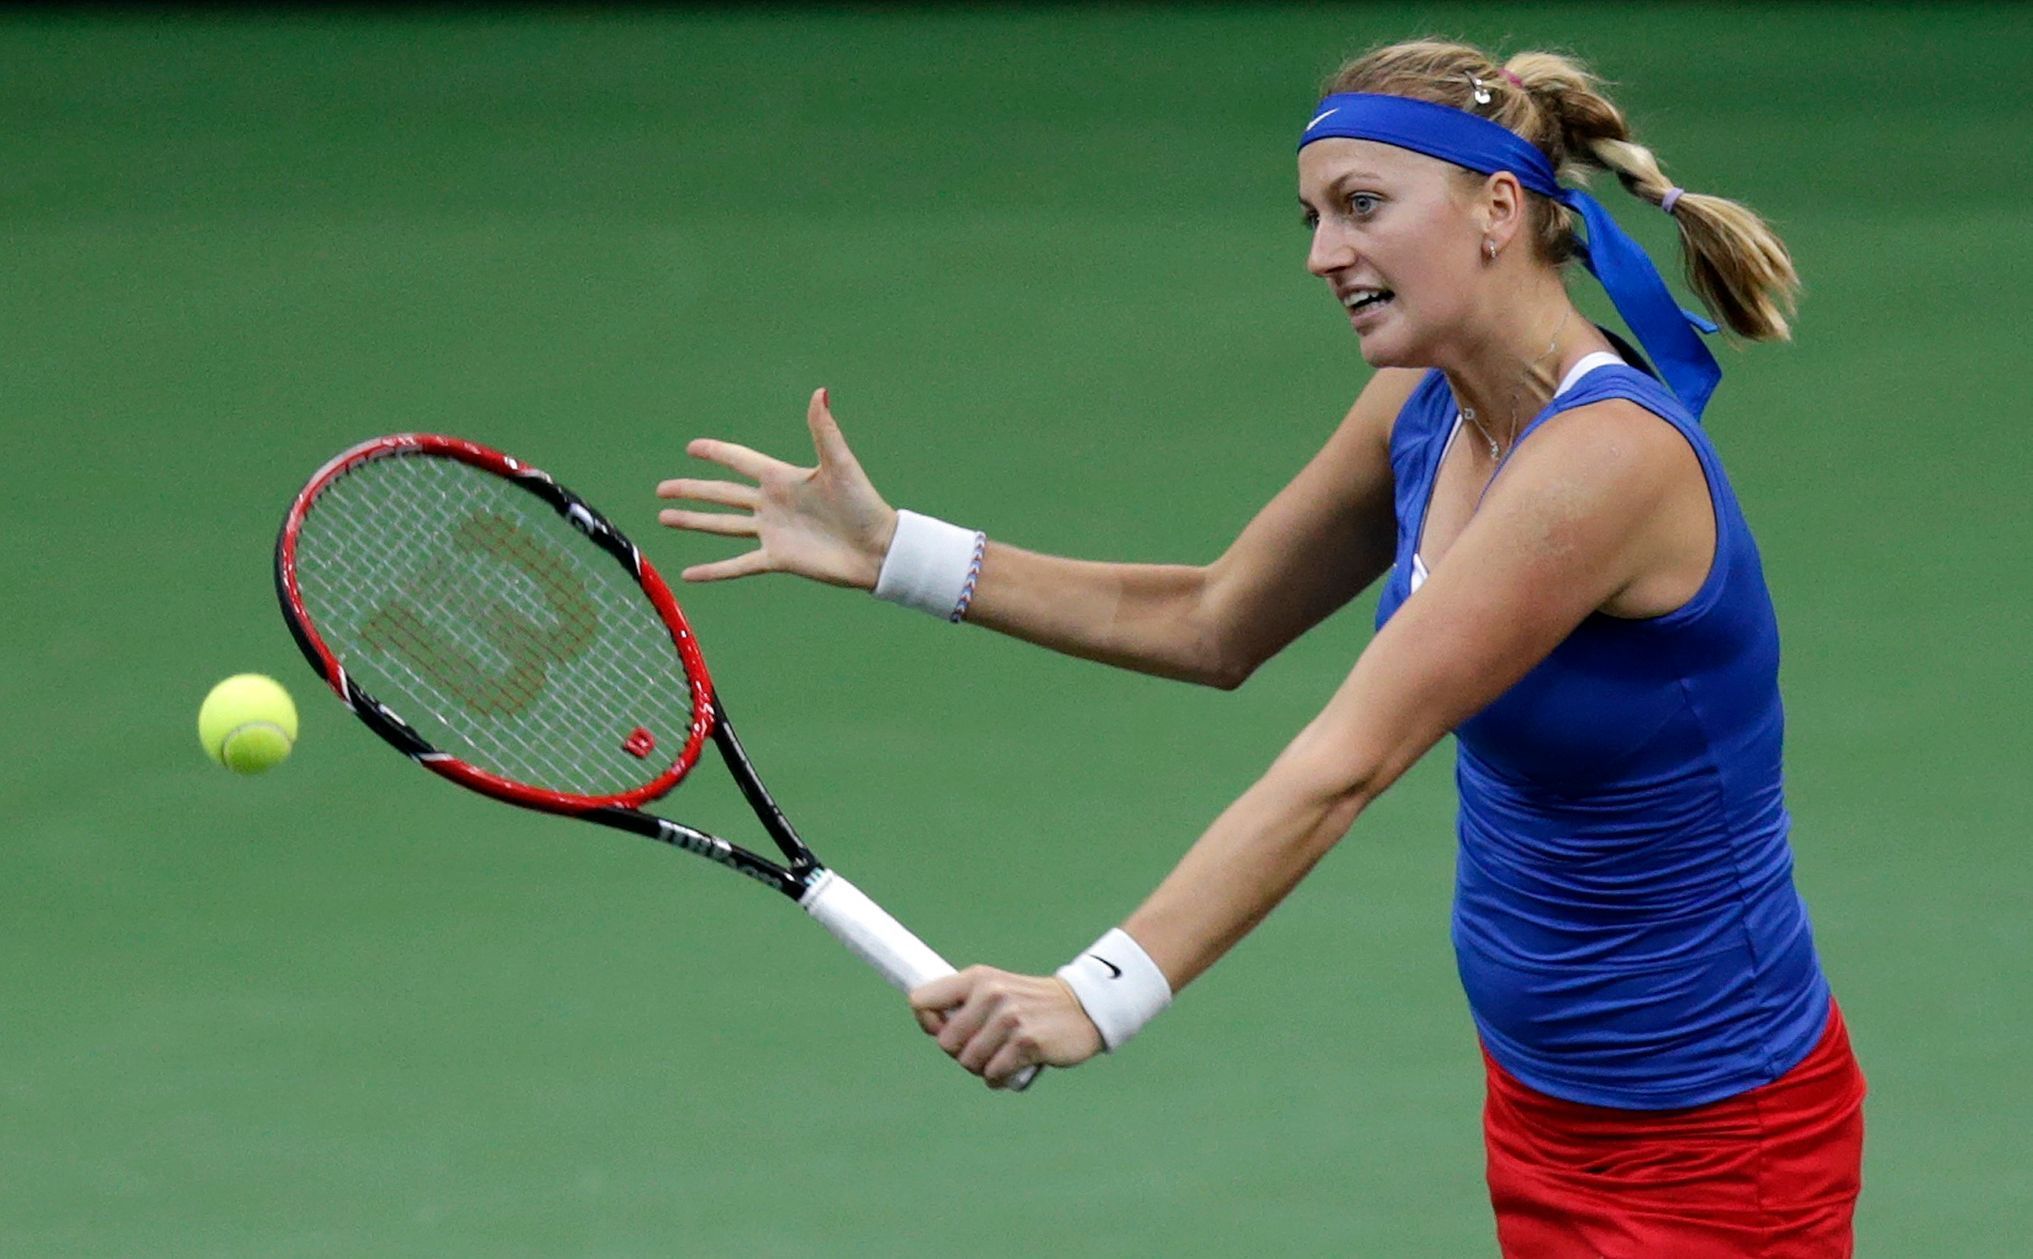 Czech Republic's Petra Kvitova returns a ball to Germany's Andrea Petkovic during their final match of the Fed Cup tennis tournament in Prague